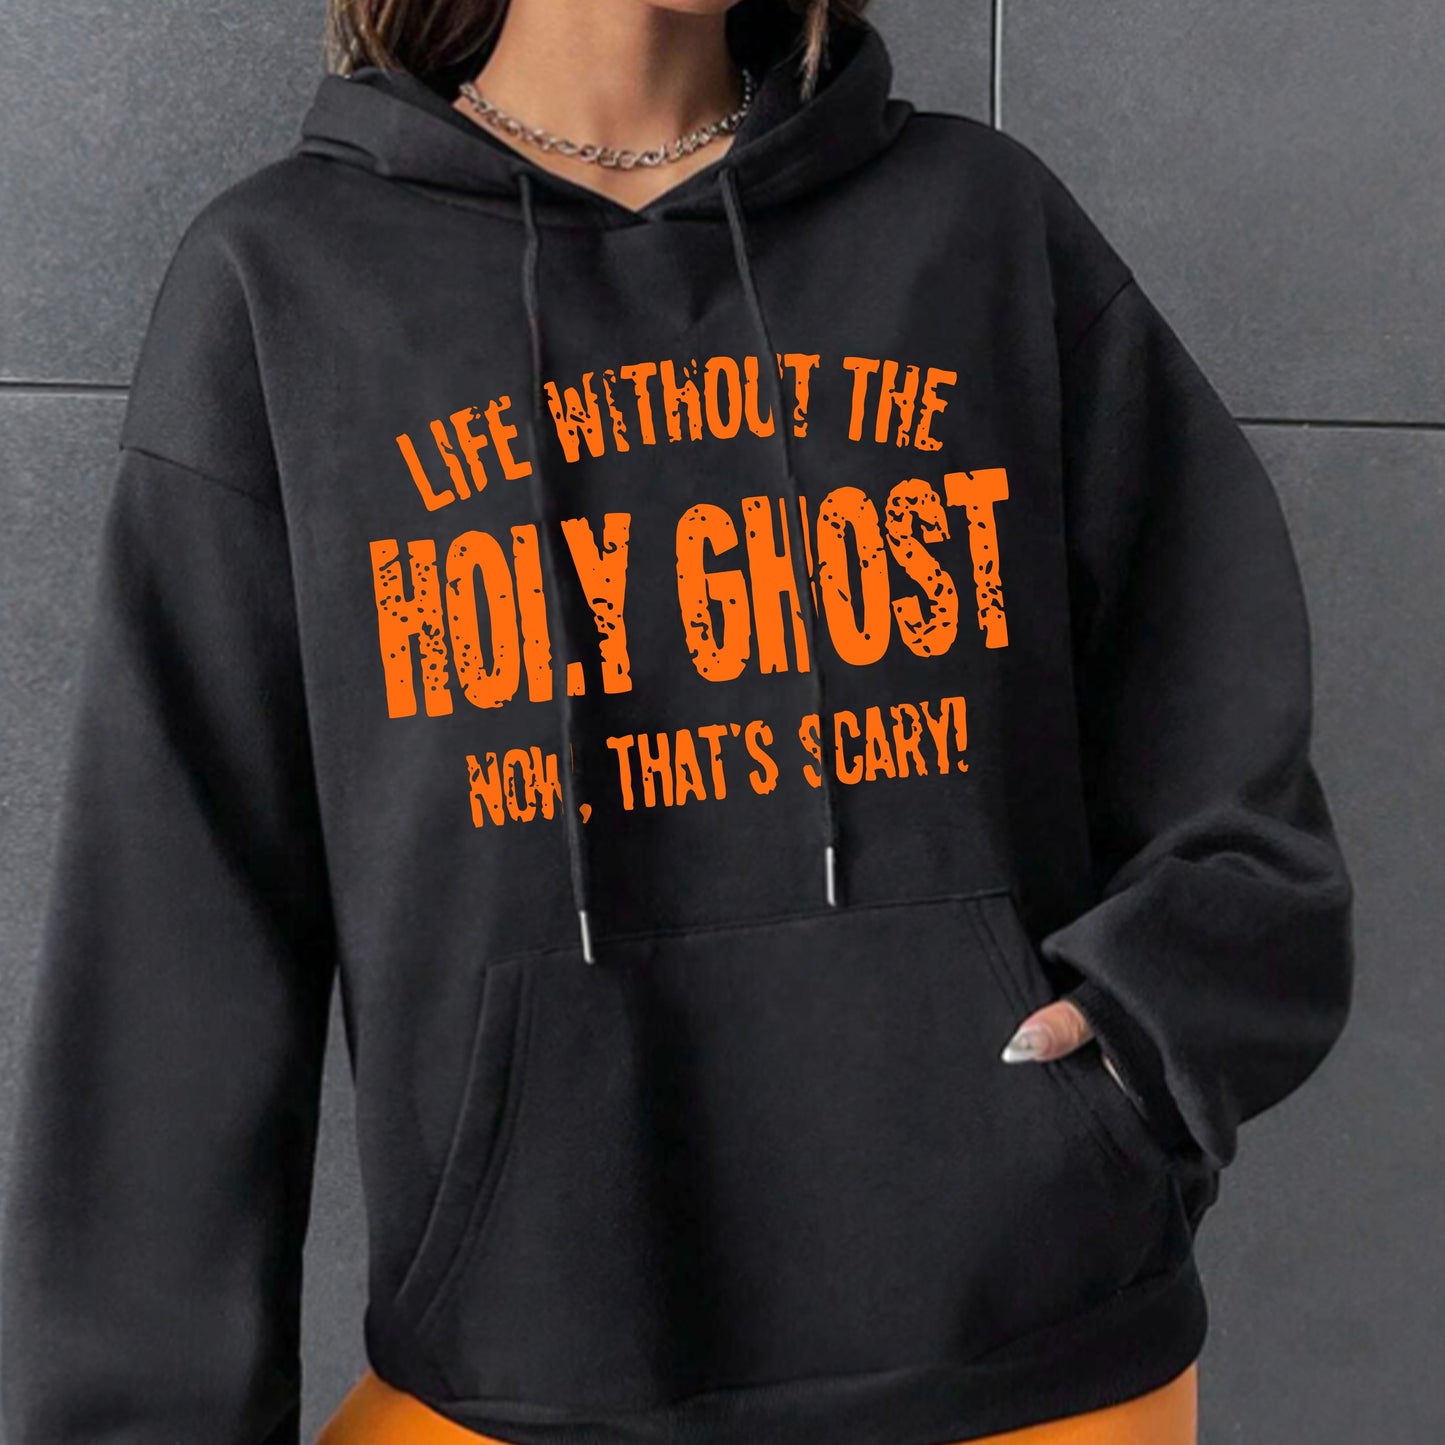 Life Without The Holy Ghost Now That's Scary Women's Christian Pullover Hooded Sweatshirt claimedbygoddesigns